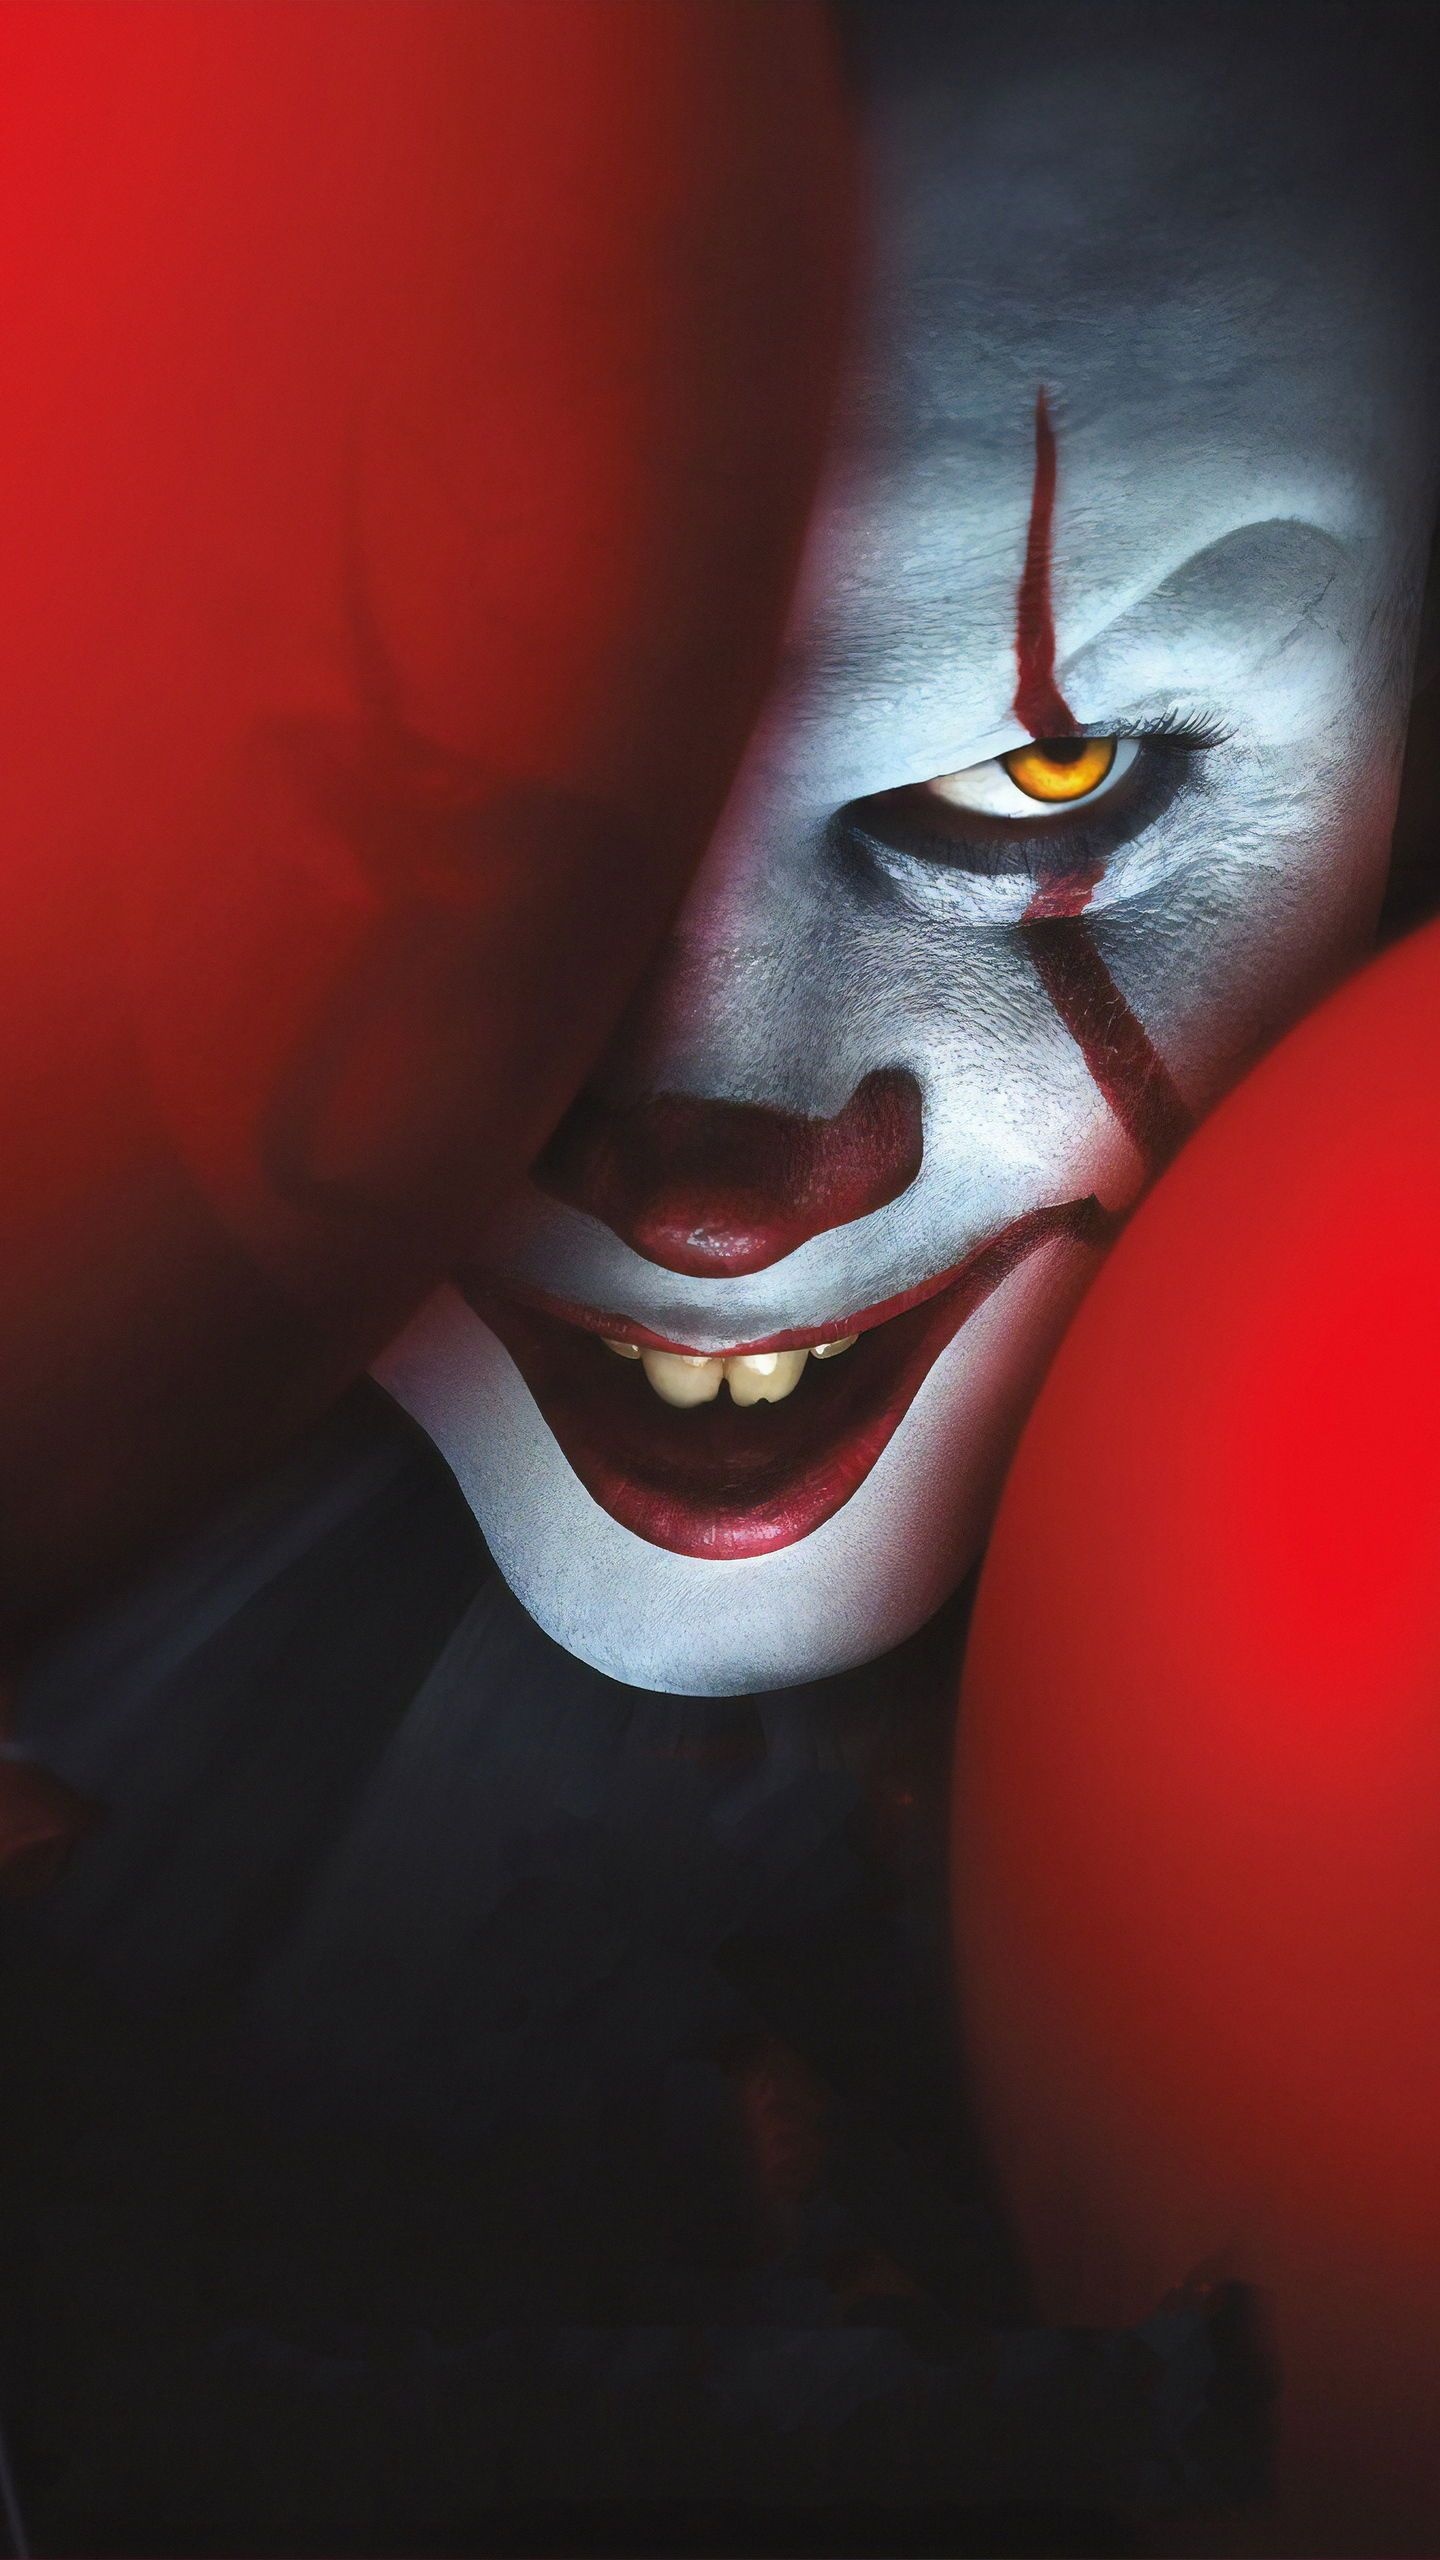 Pennywise iPhone wallpapers, Horror-themed, Terrifying visuals, Creepy clown, 1440x2560 HD Handy